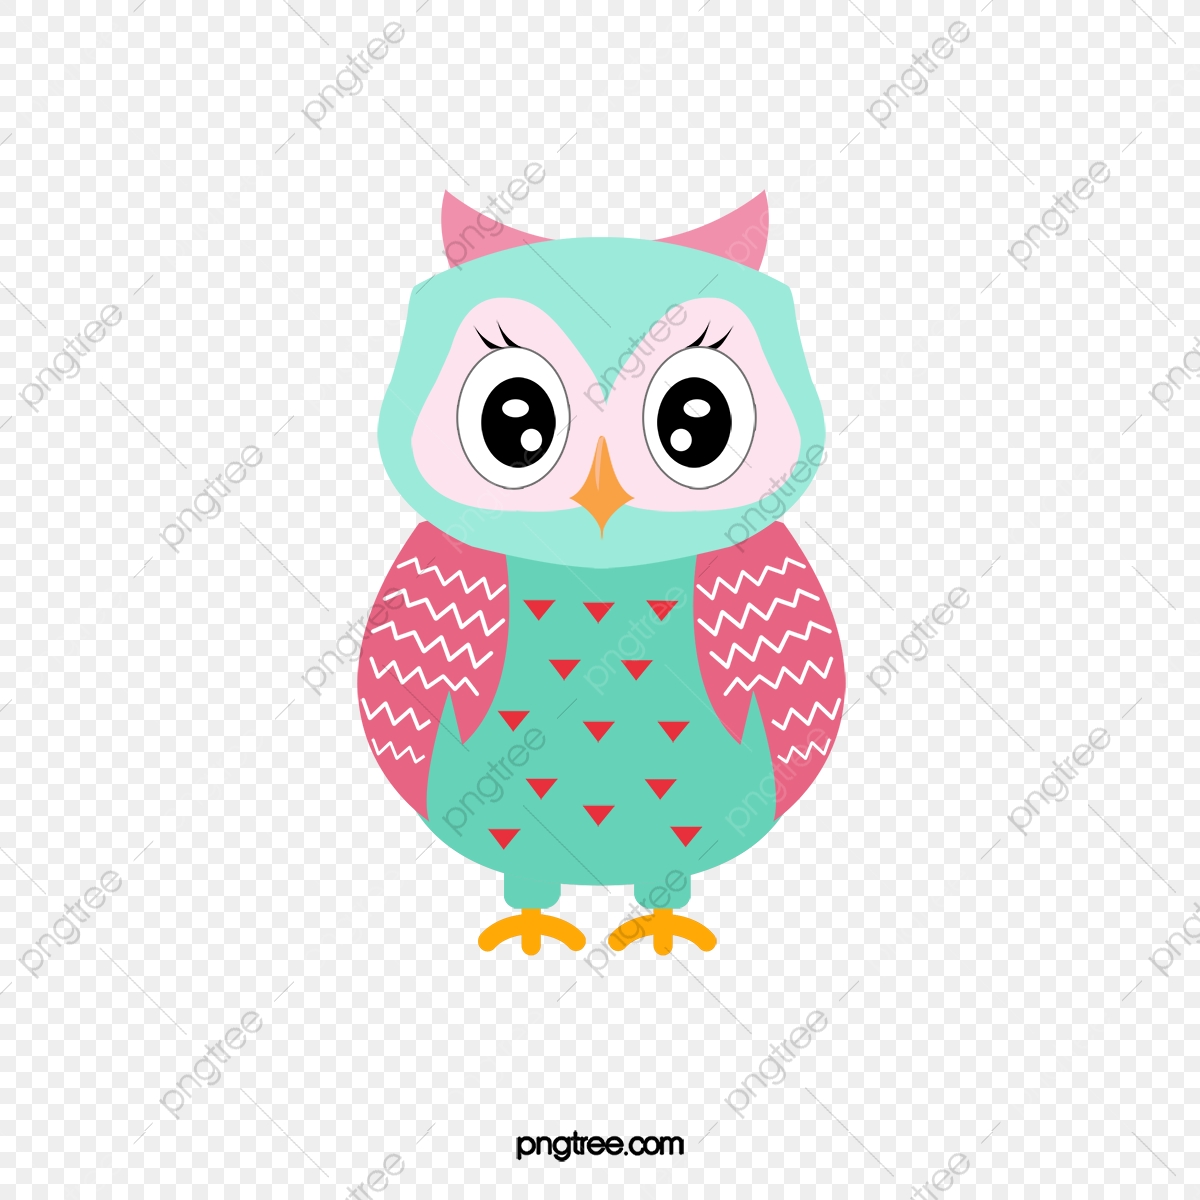 owl clipart pink